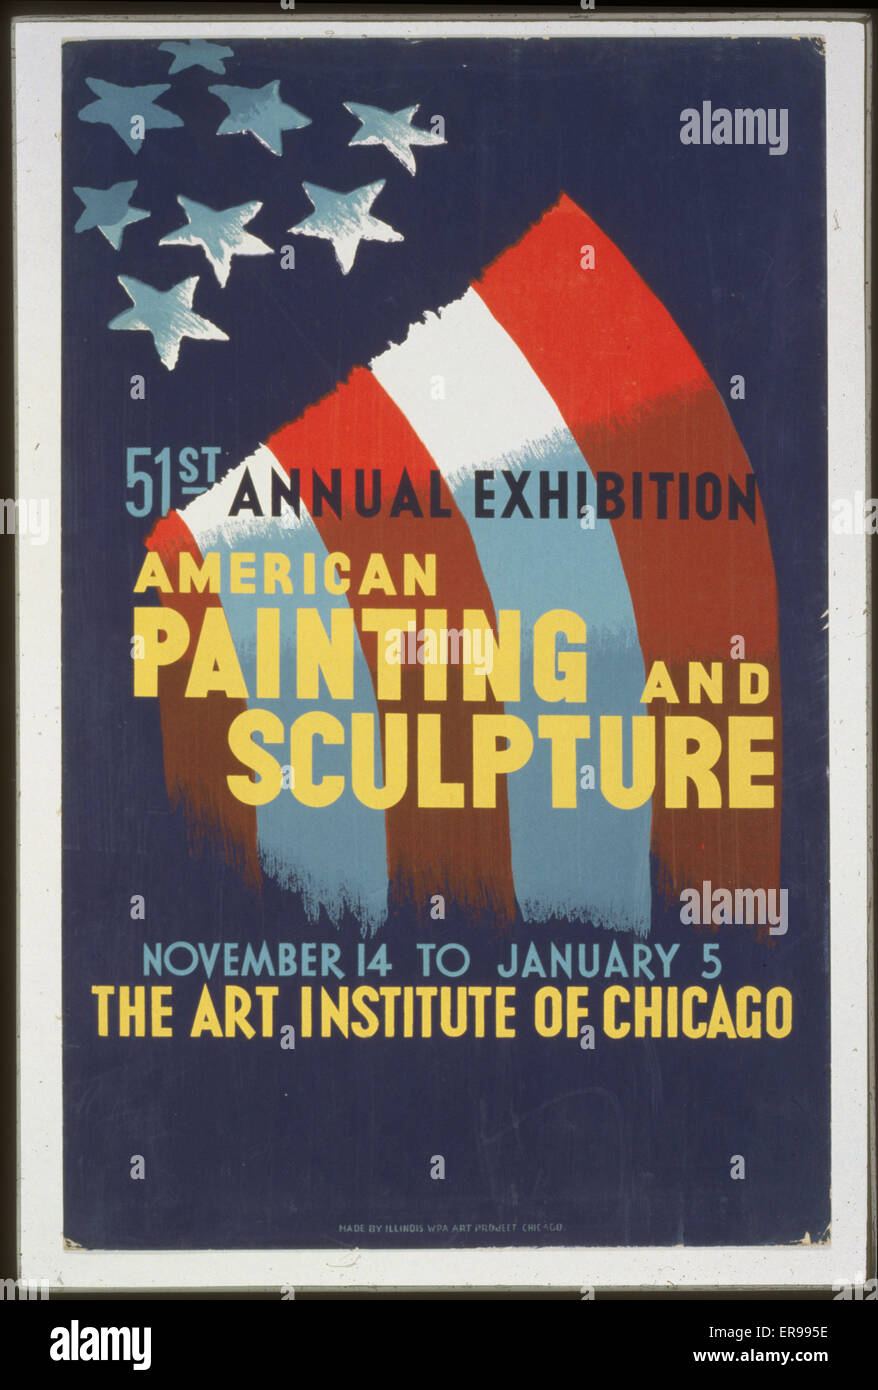 51st annual exhibition - American painting and sculpture. Poster for art exhibition at the Art Institute of Chicago, November 14 to January 5, showing part of an American flag. Date 1940. Stock Photo